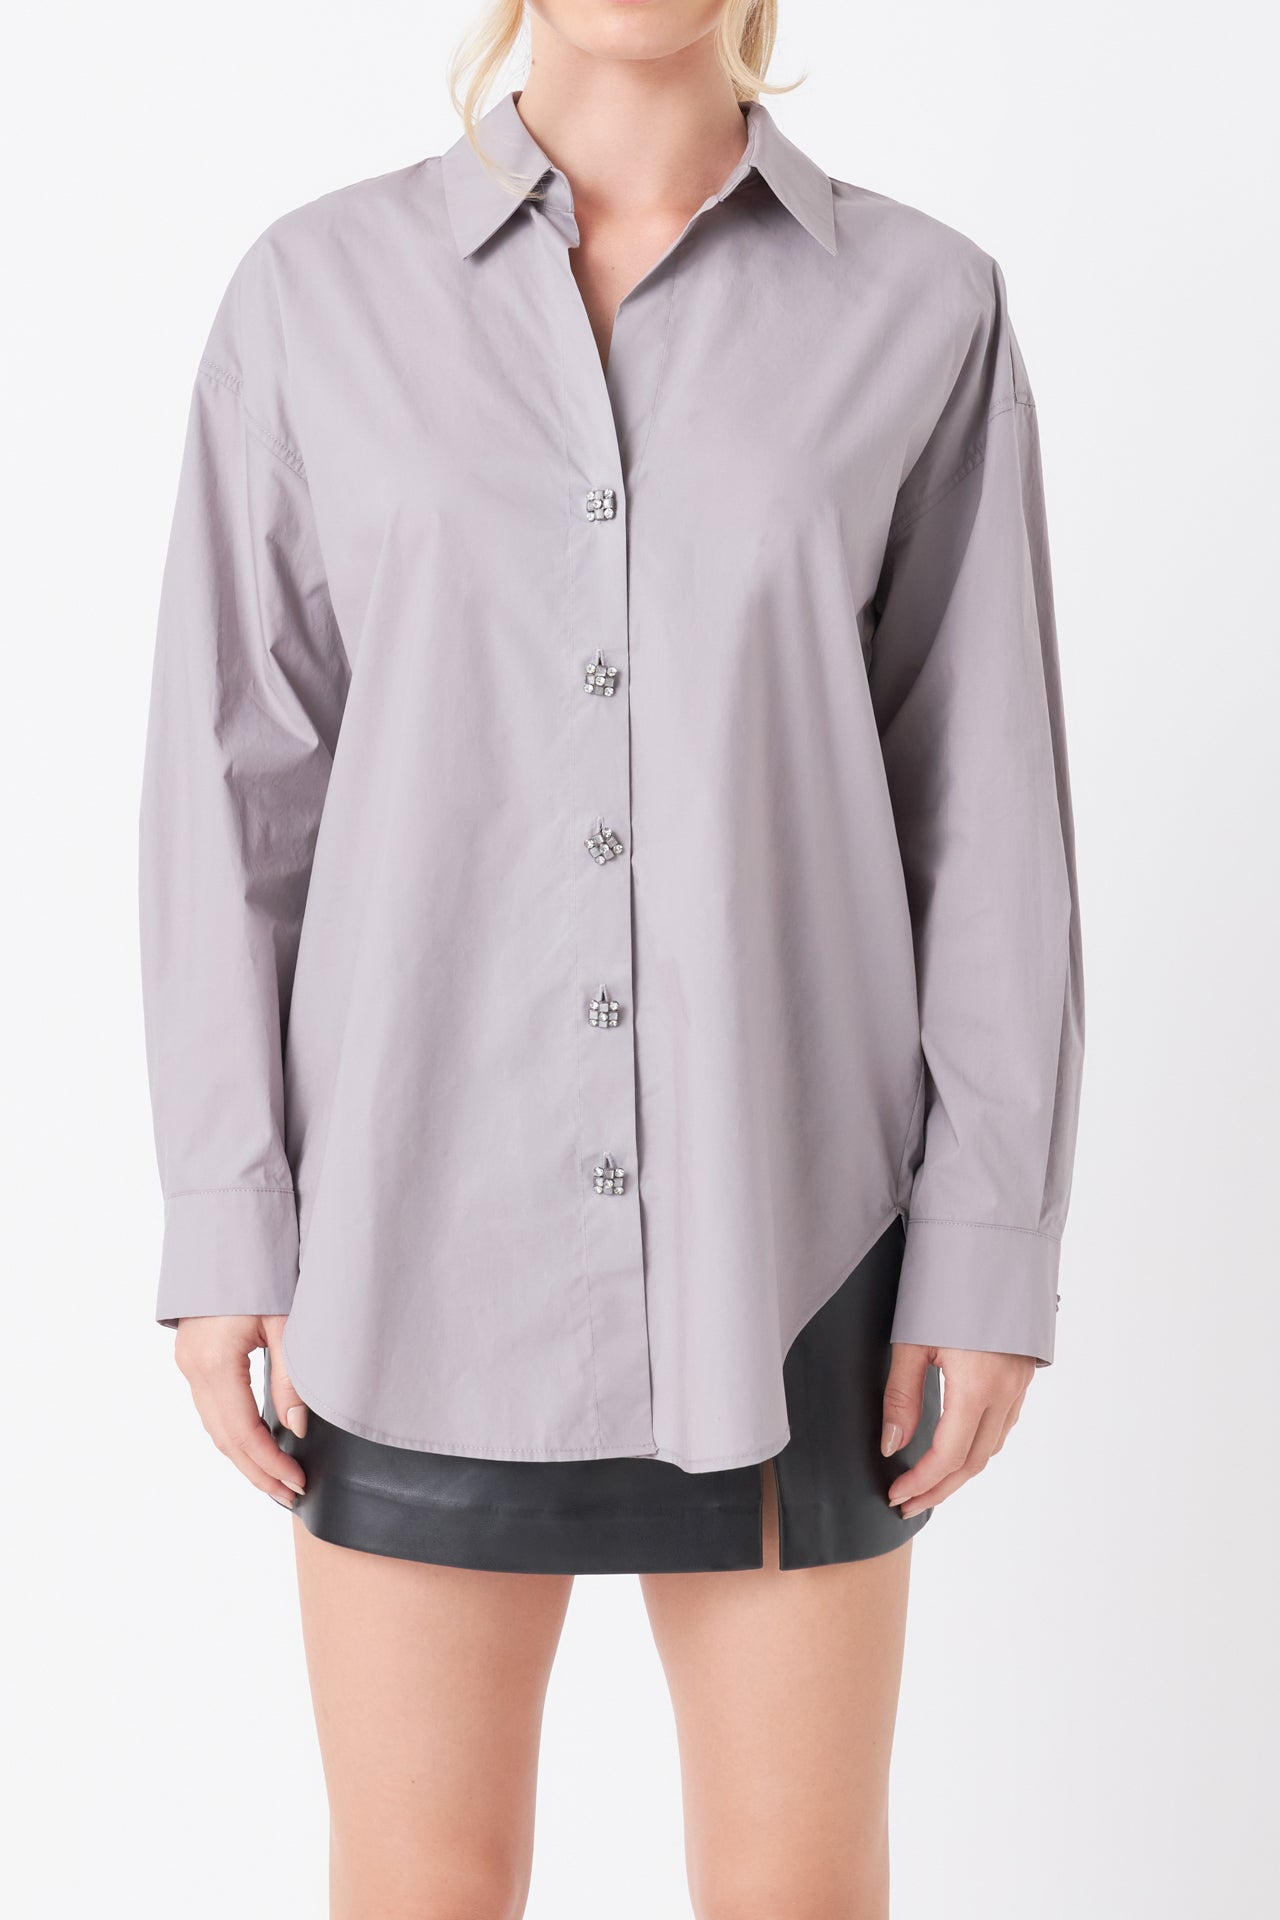 Endless Rose - Oversize Button Collared Shirt - Shirts & blouses in Women's Clothing available at endlessrose.com